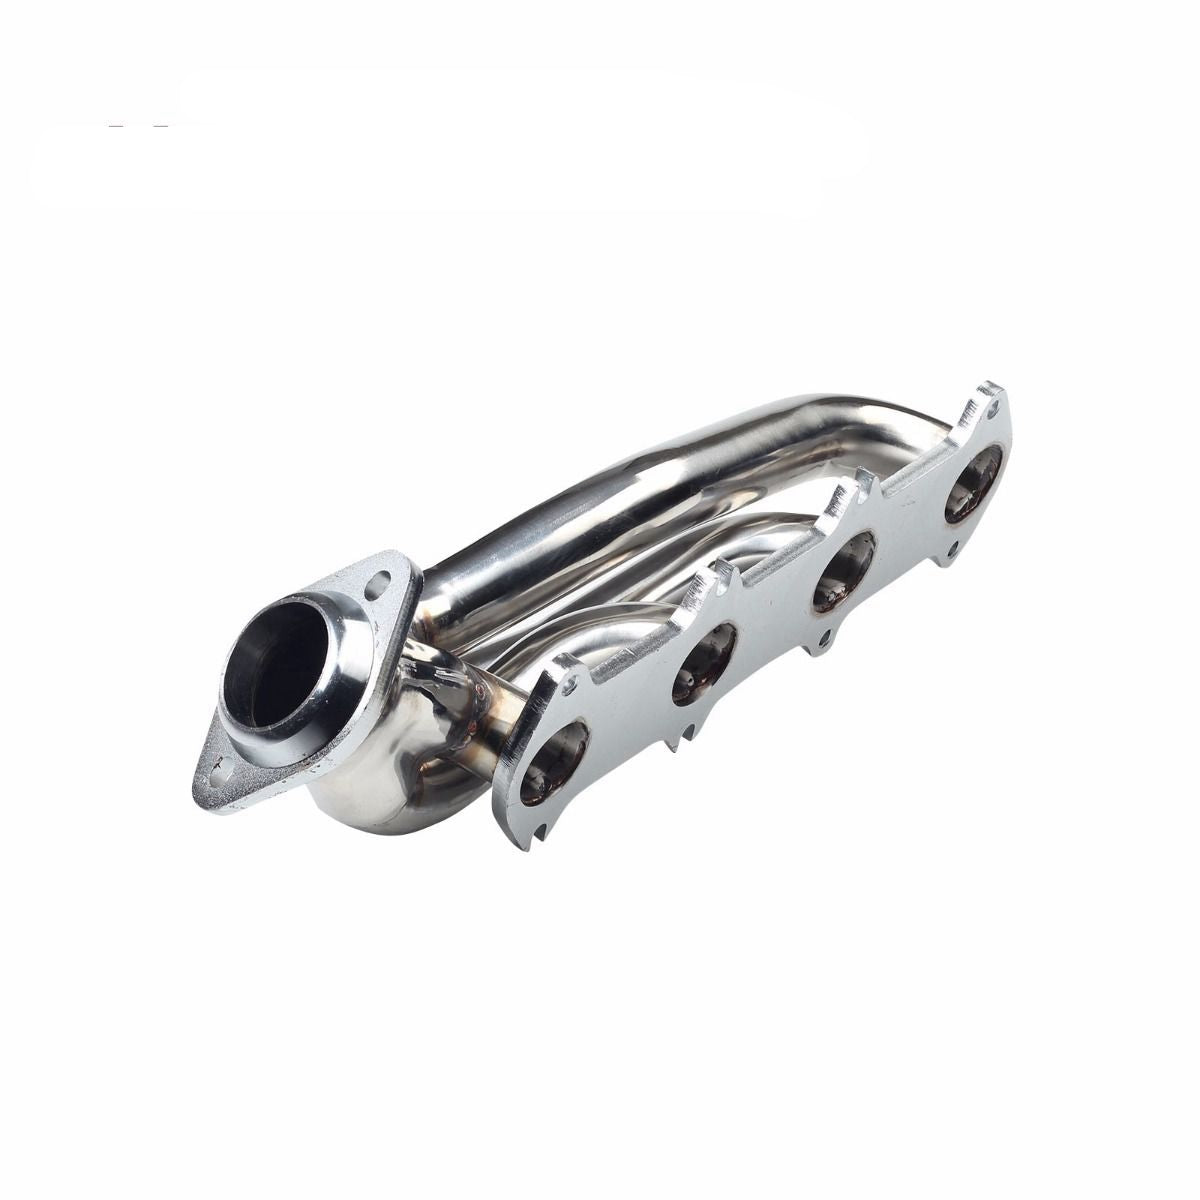 Exhaust Manifold Shorty Headers For Ford F150 5.4L V8 Engine - 0